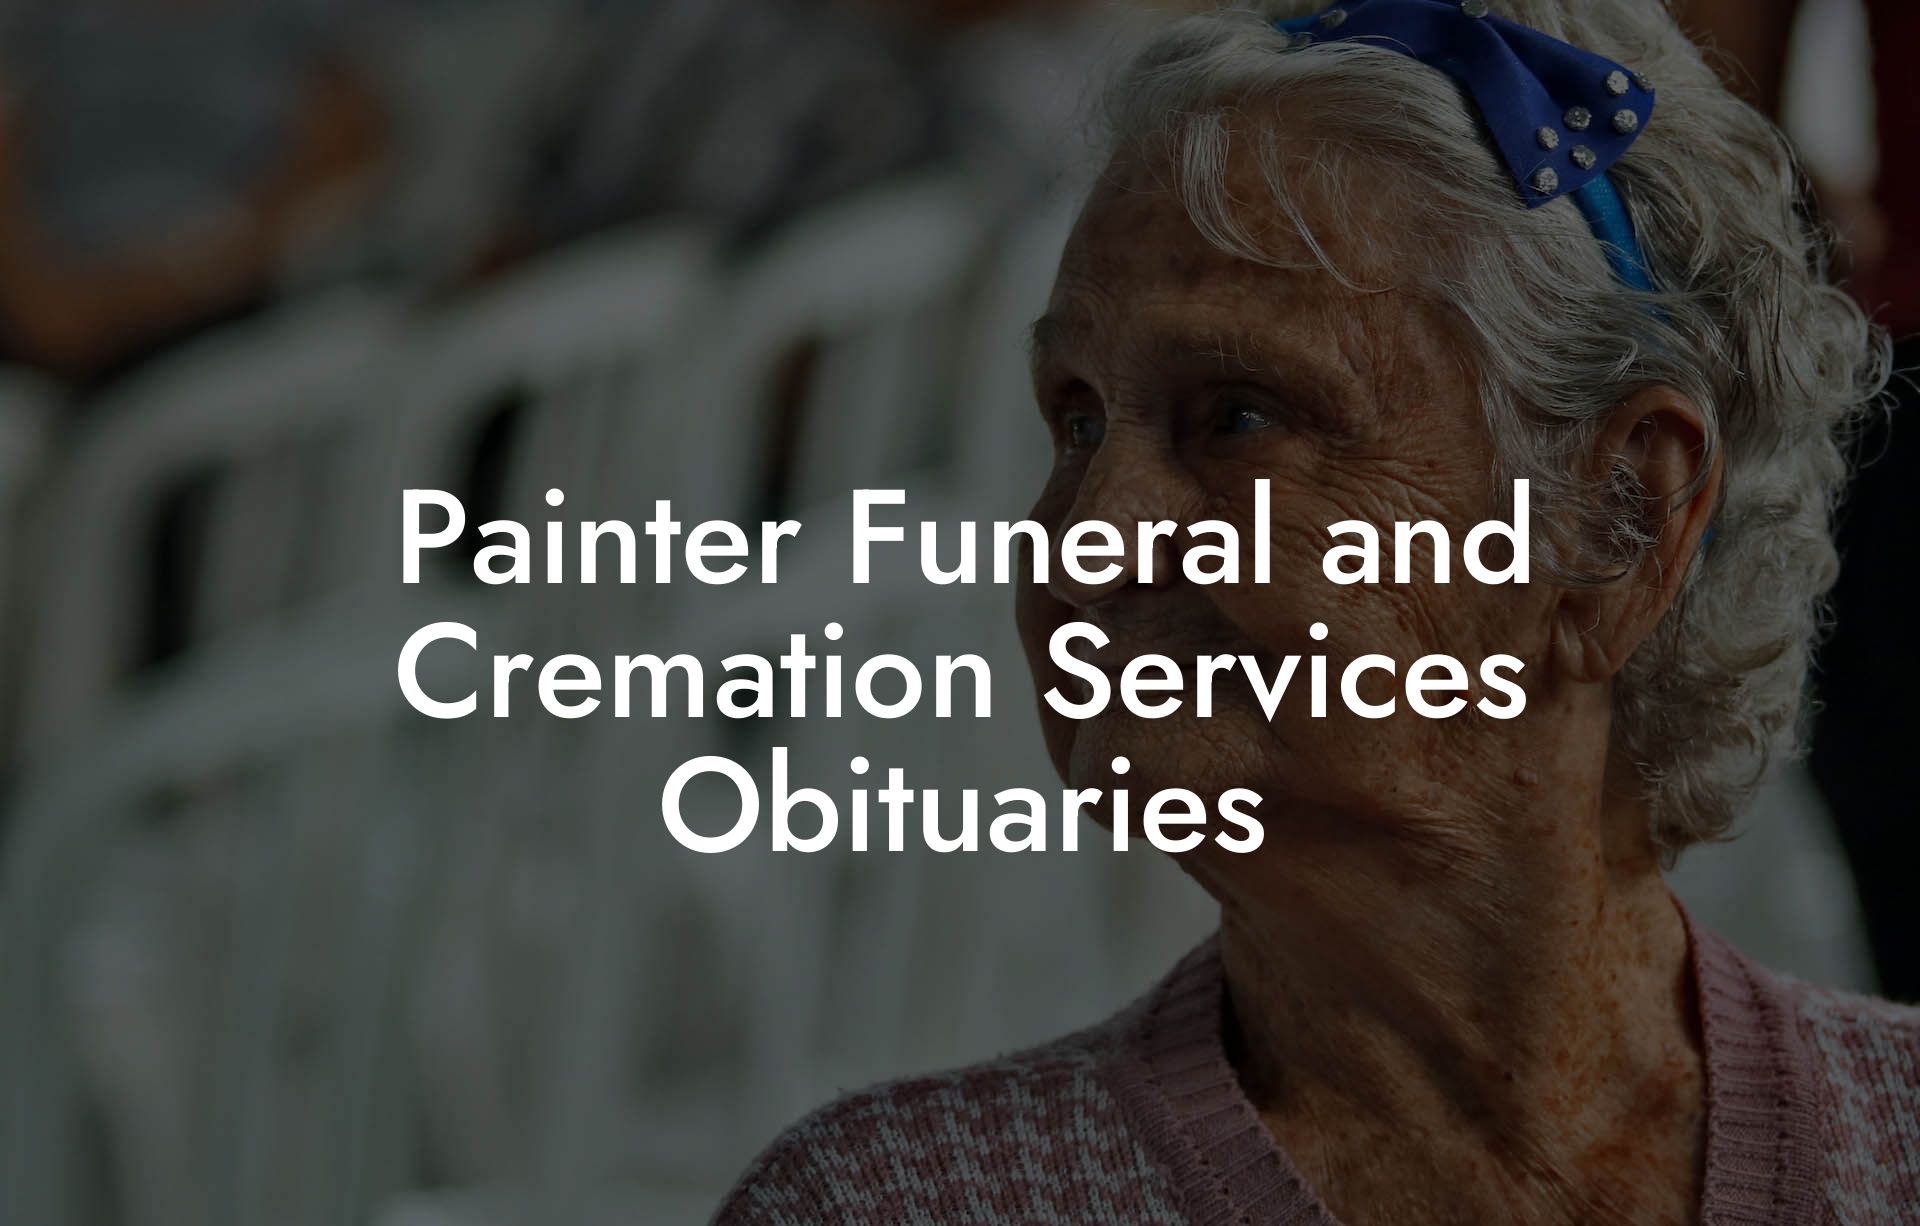 Painter Funeral and Cremation Services Obituaries